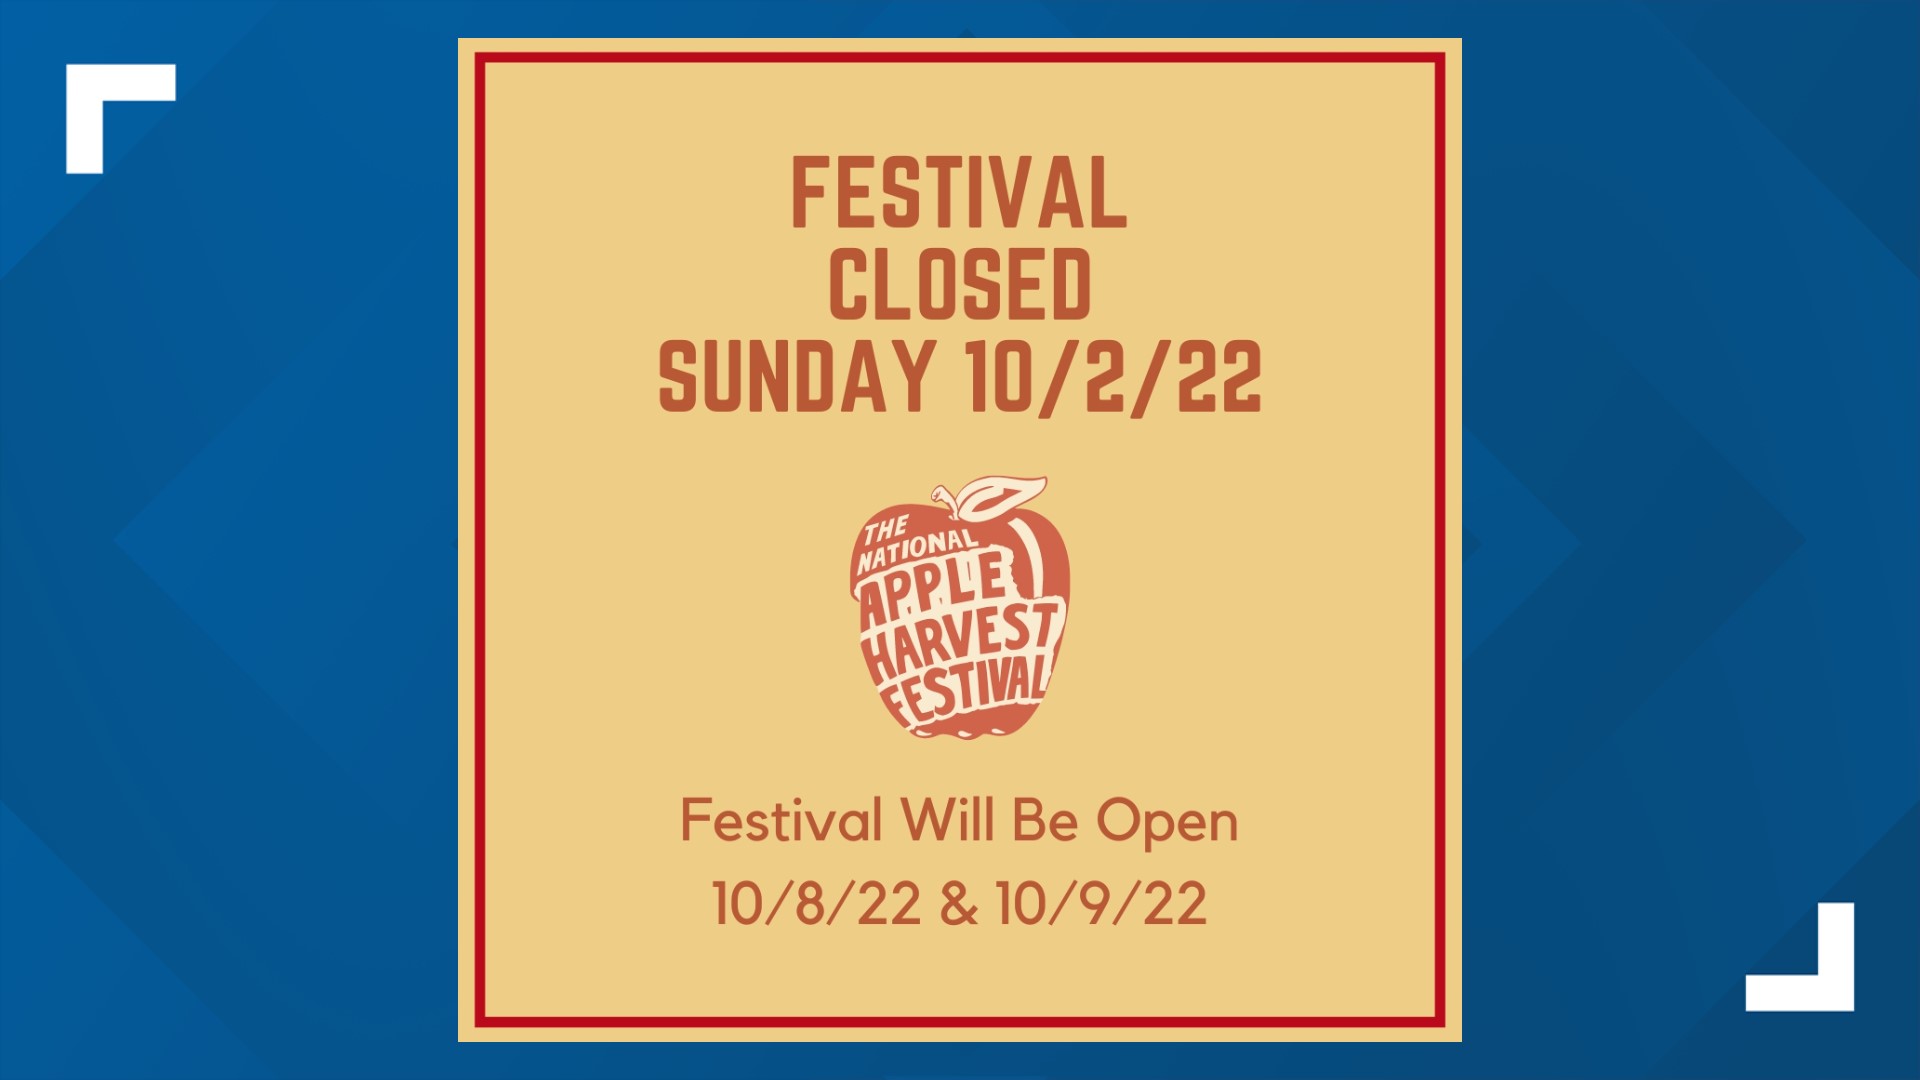 The festival will resume next weekend, Oct. 8 and 9, as scheduled.